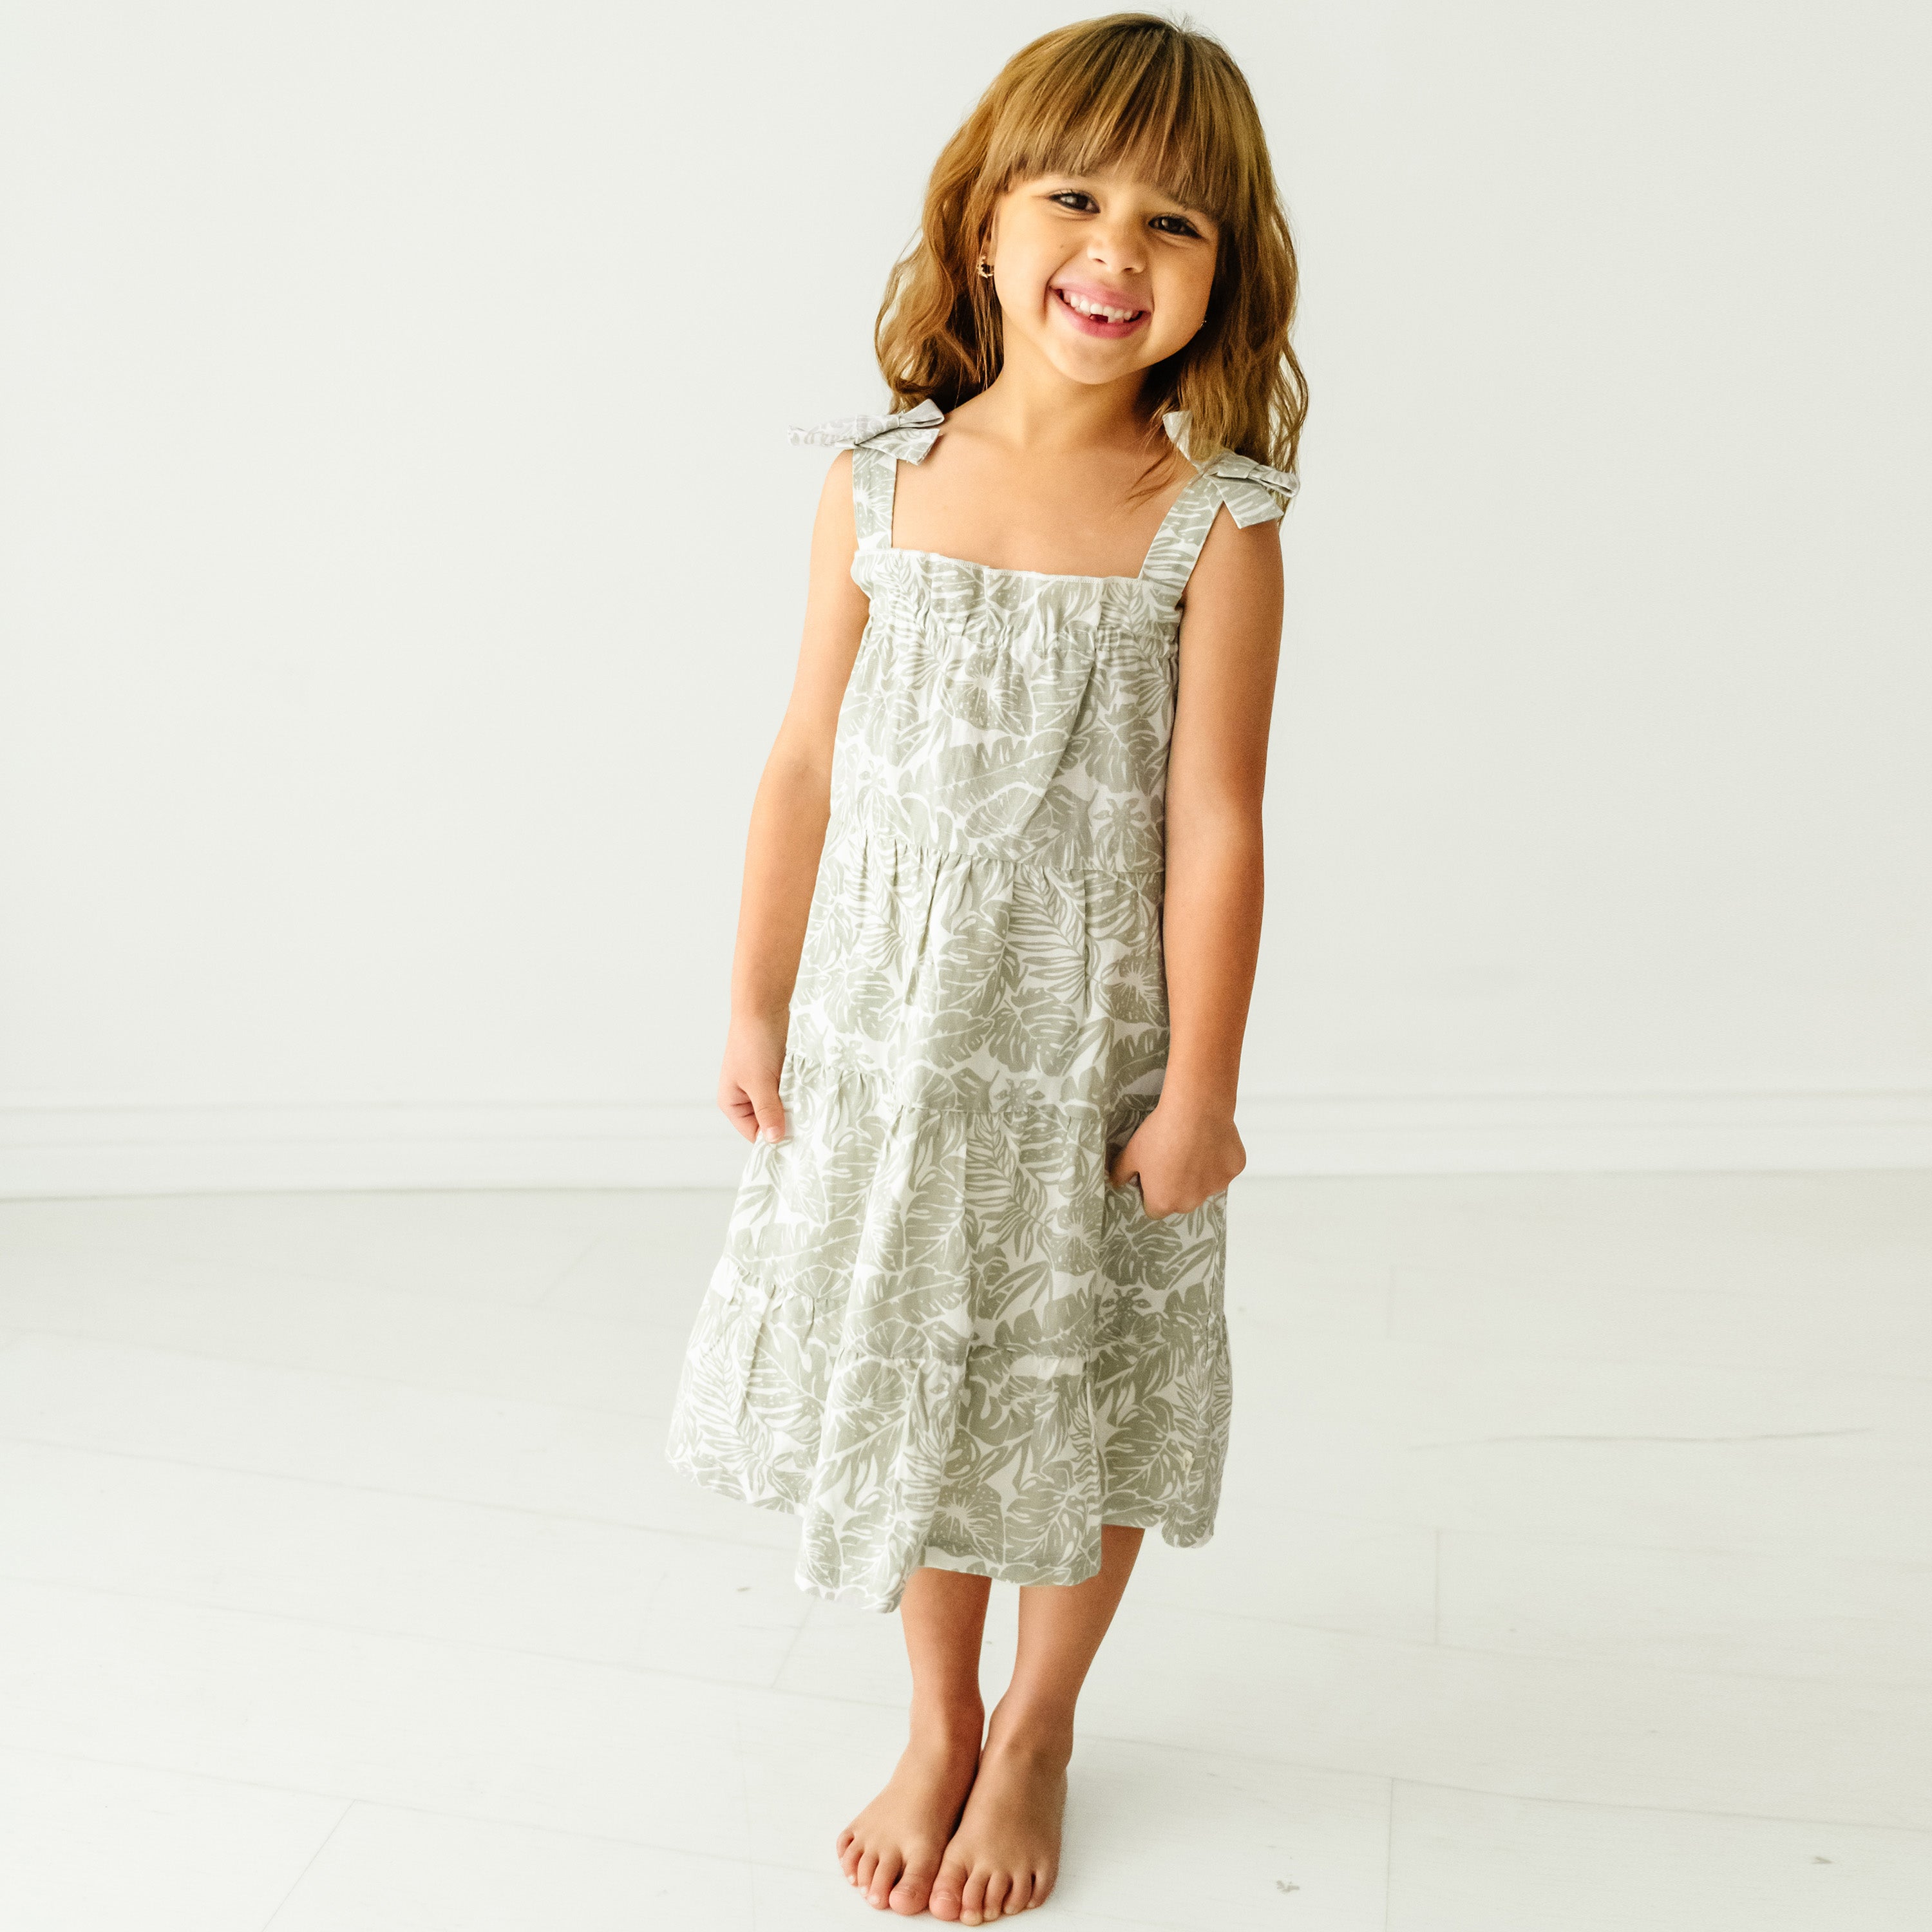 A young girl with shoulder-length brown hair smiles at the camera, wearing a white and green floral print dress. She is standing barefoot in a bright, neutral-toned room. The dress she is wearing is the Organic Linen Tiered Strap Dress in Palms by Makemake Organics.